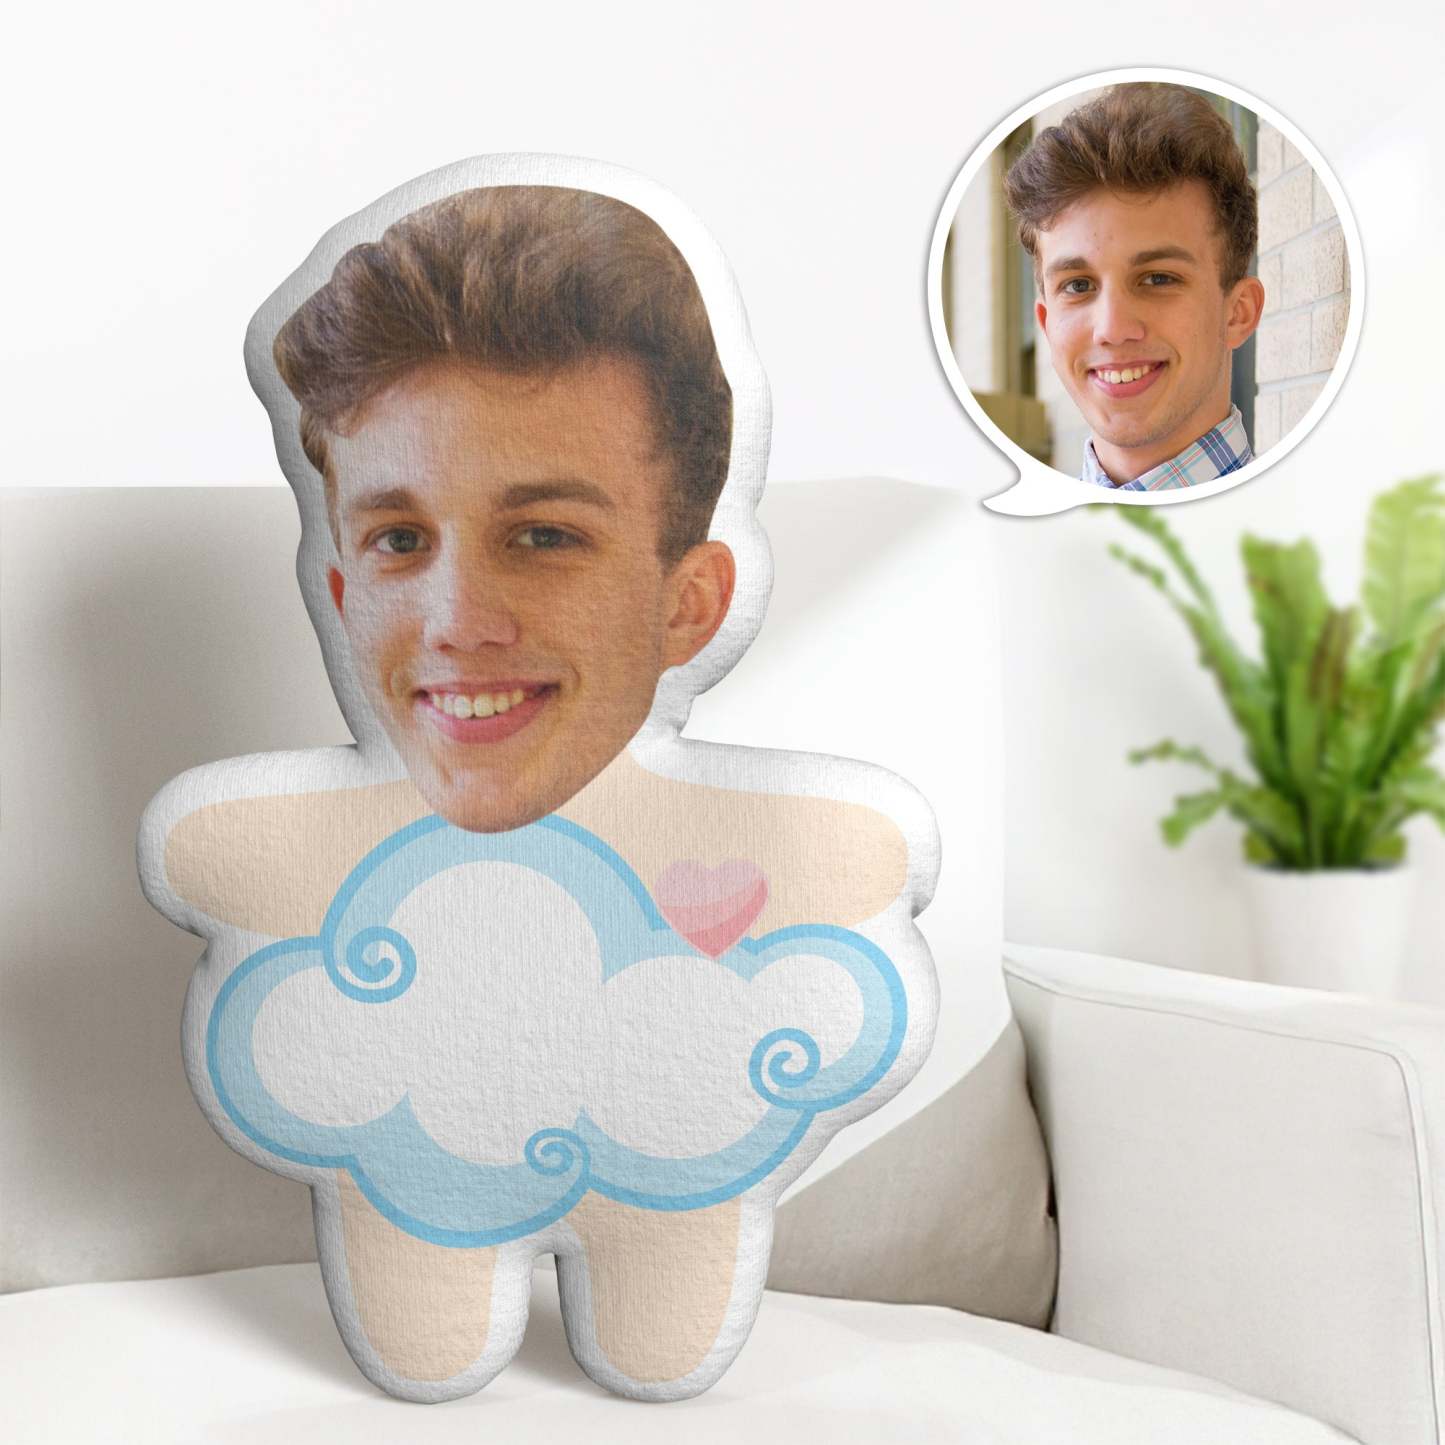 Personalized Face Minime Throw Pillow Custom Cloud Minime Pillow Valentine's Day Gifts - soufeelmy